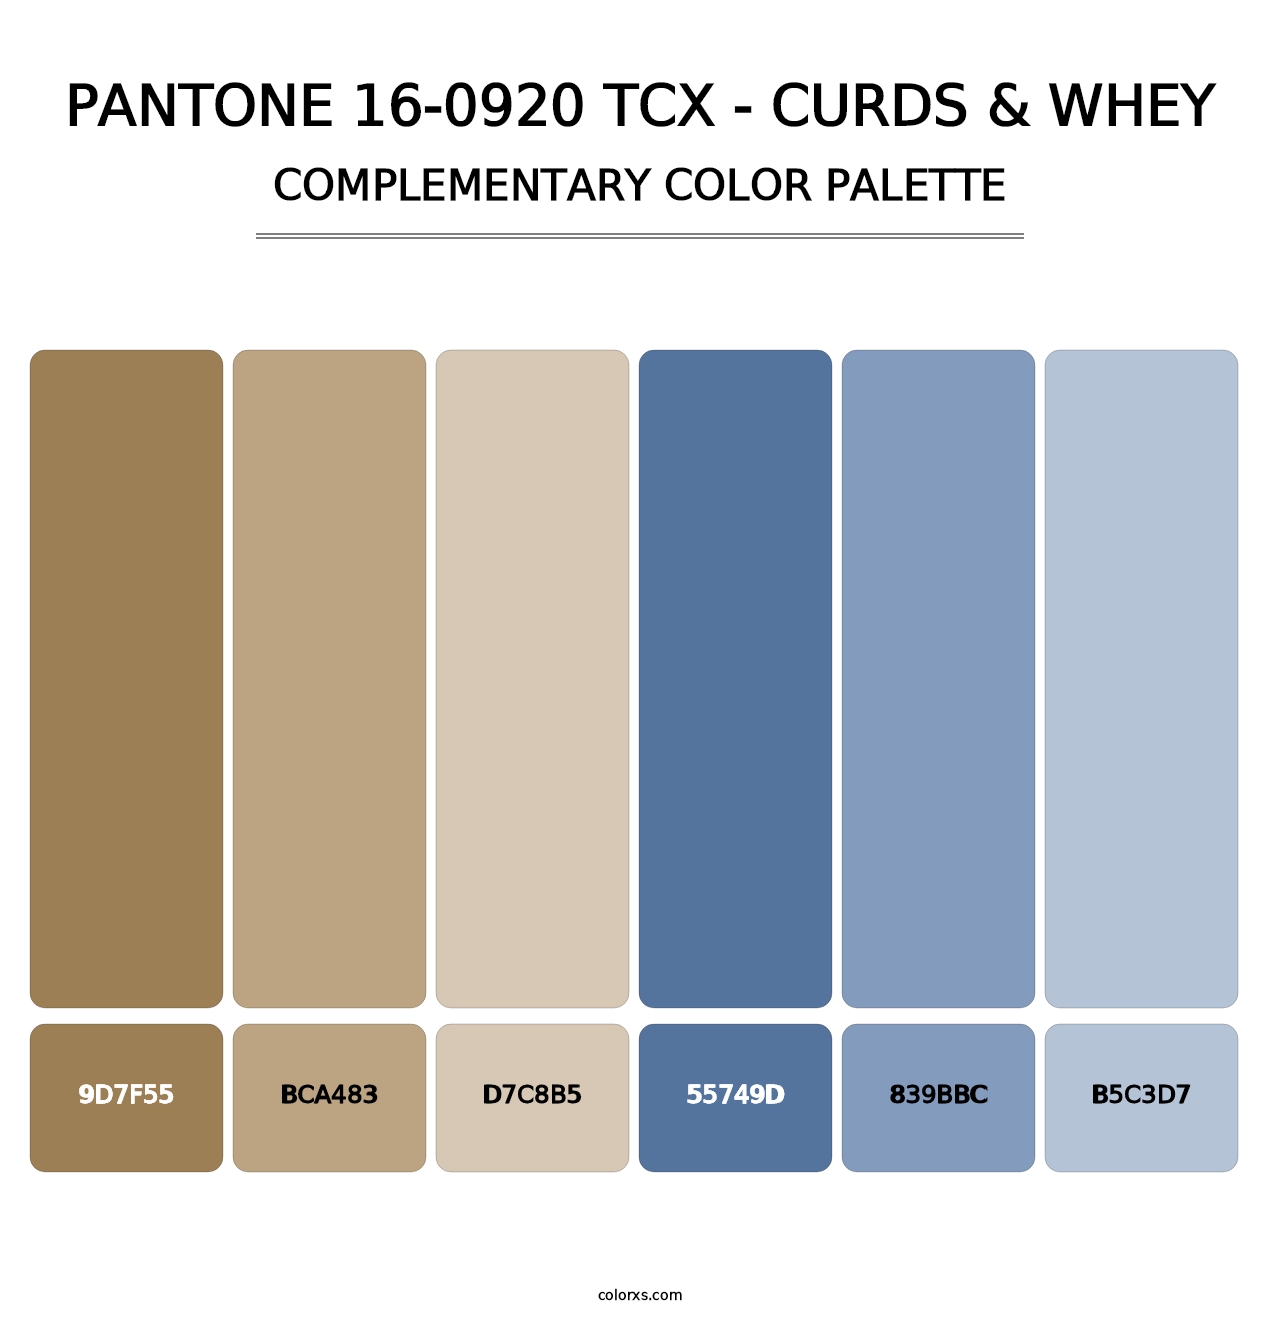 PANTONE 16-0920 TCX - Curds & Whey - Complementary Color Palette